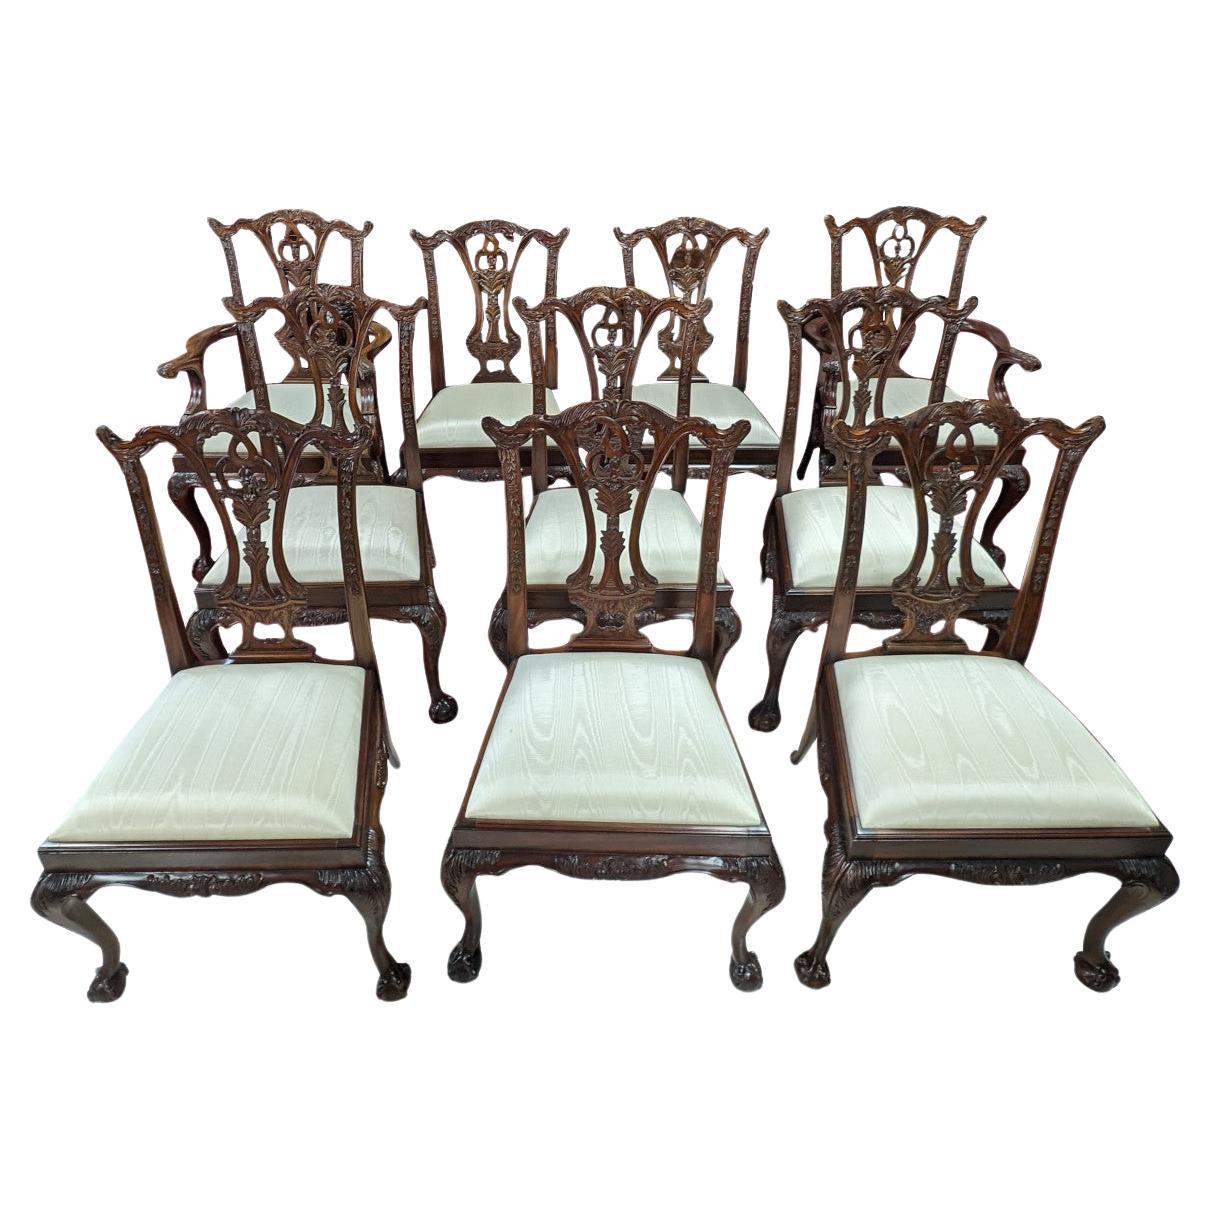 What is a Chippendale style chair?